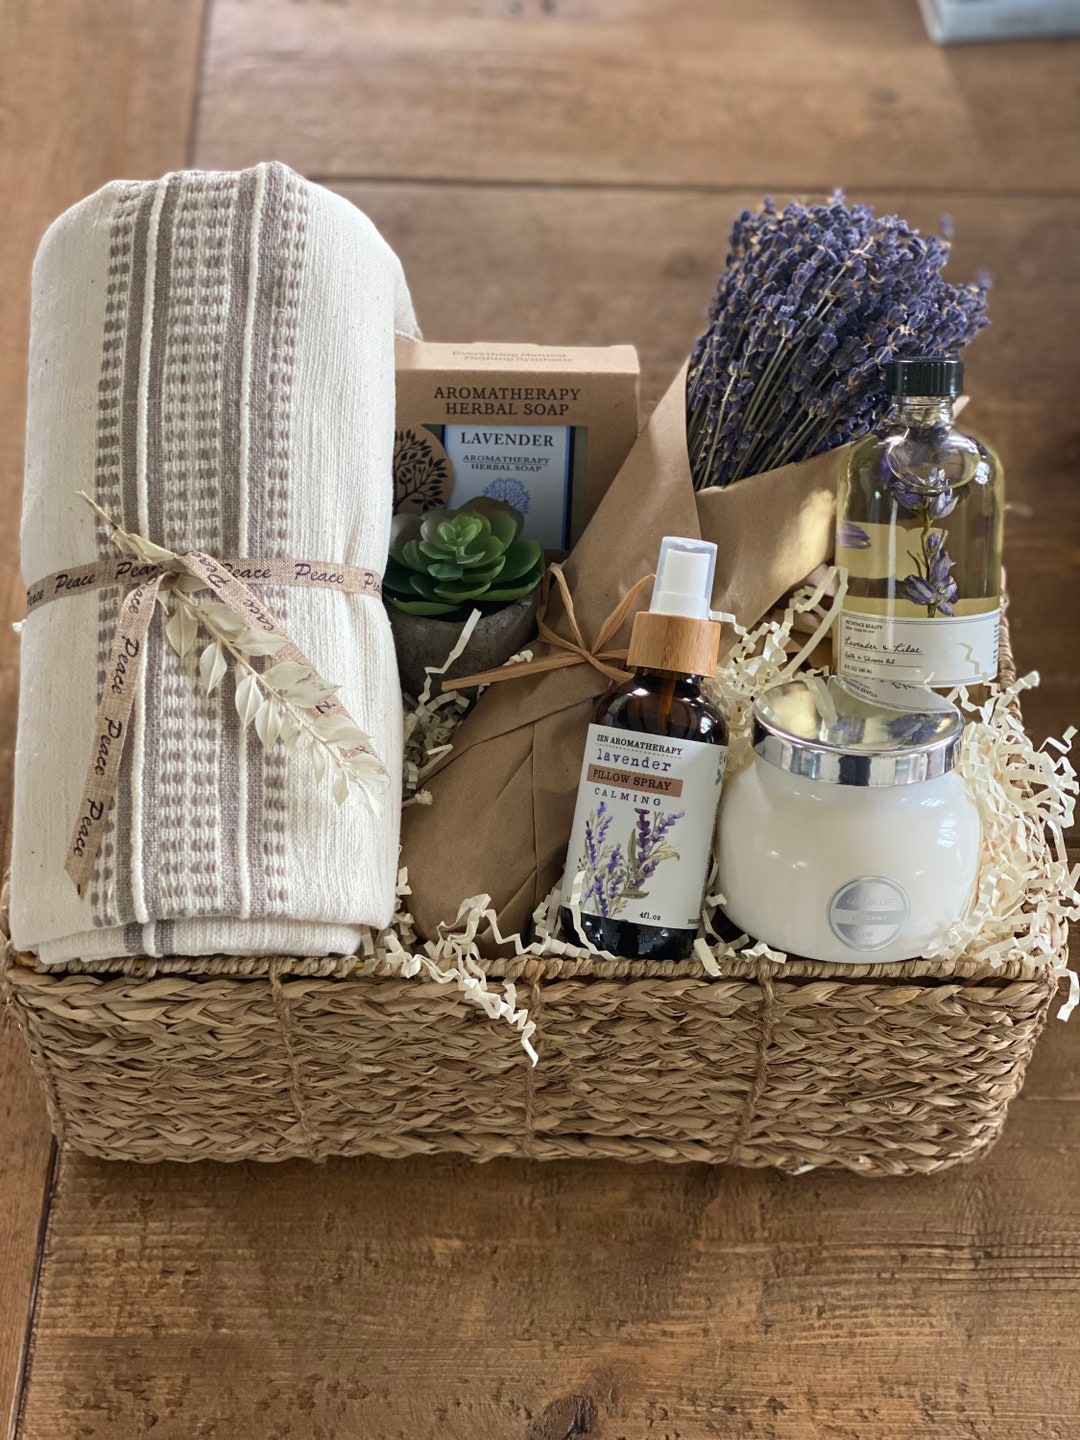 Relaxing Gifts for Women - Spa Baskets with Bath Pillow - Birthday